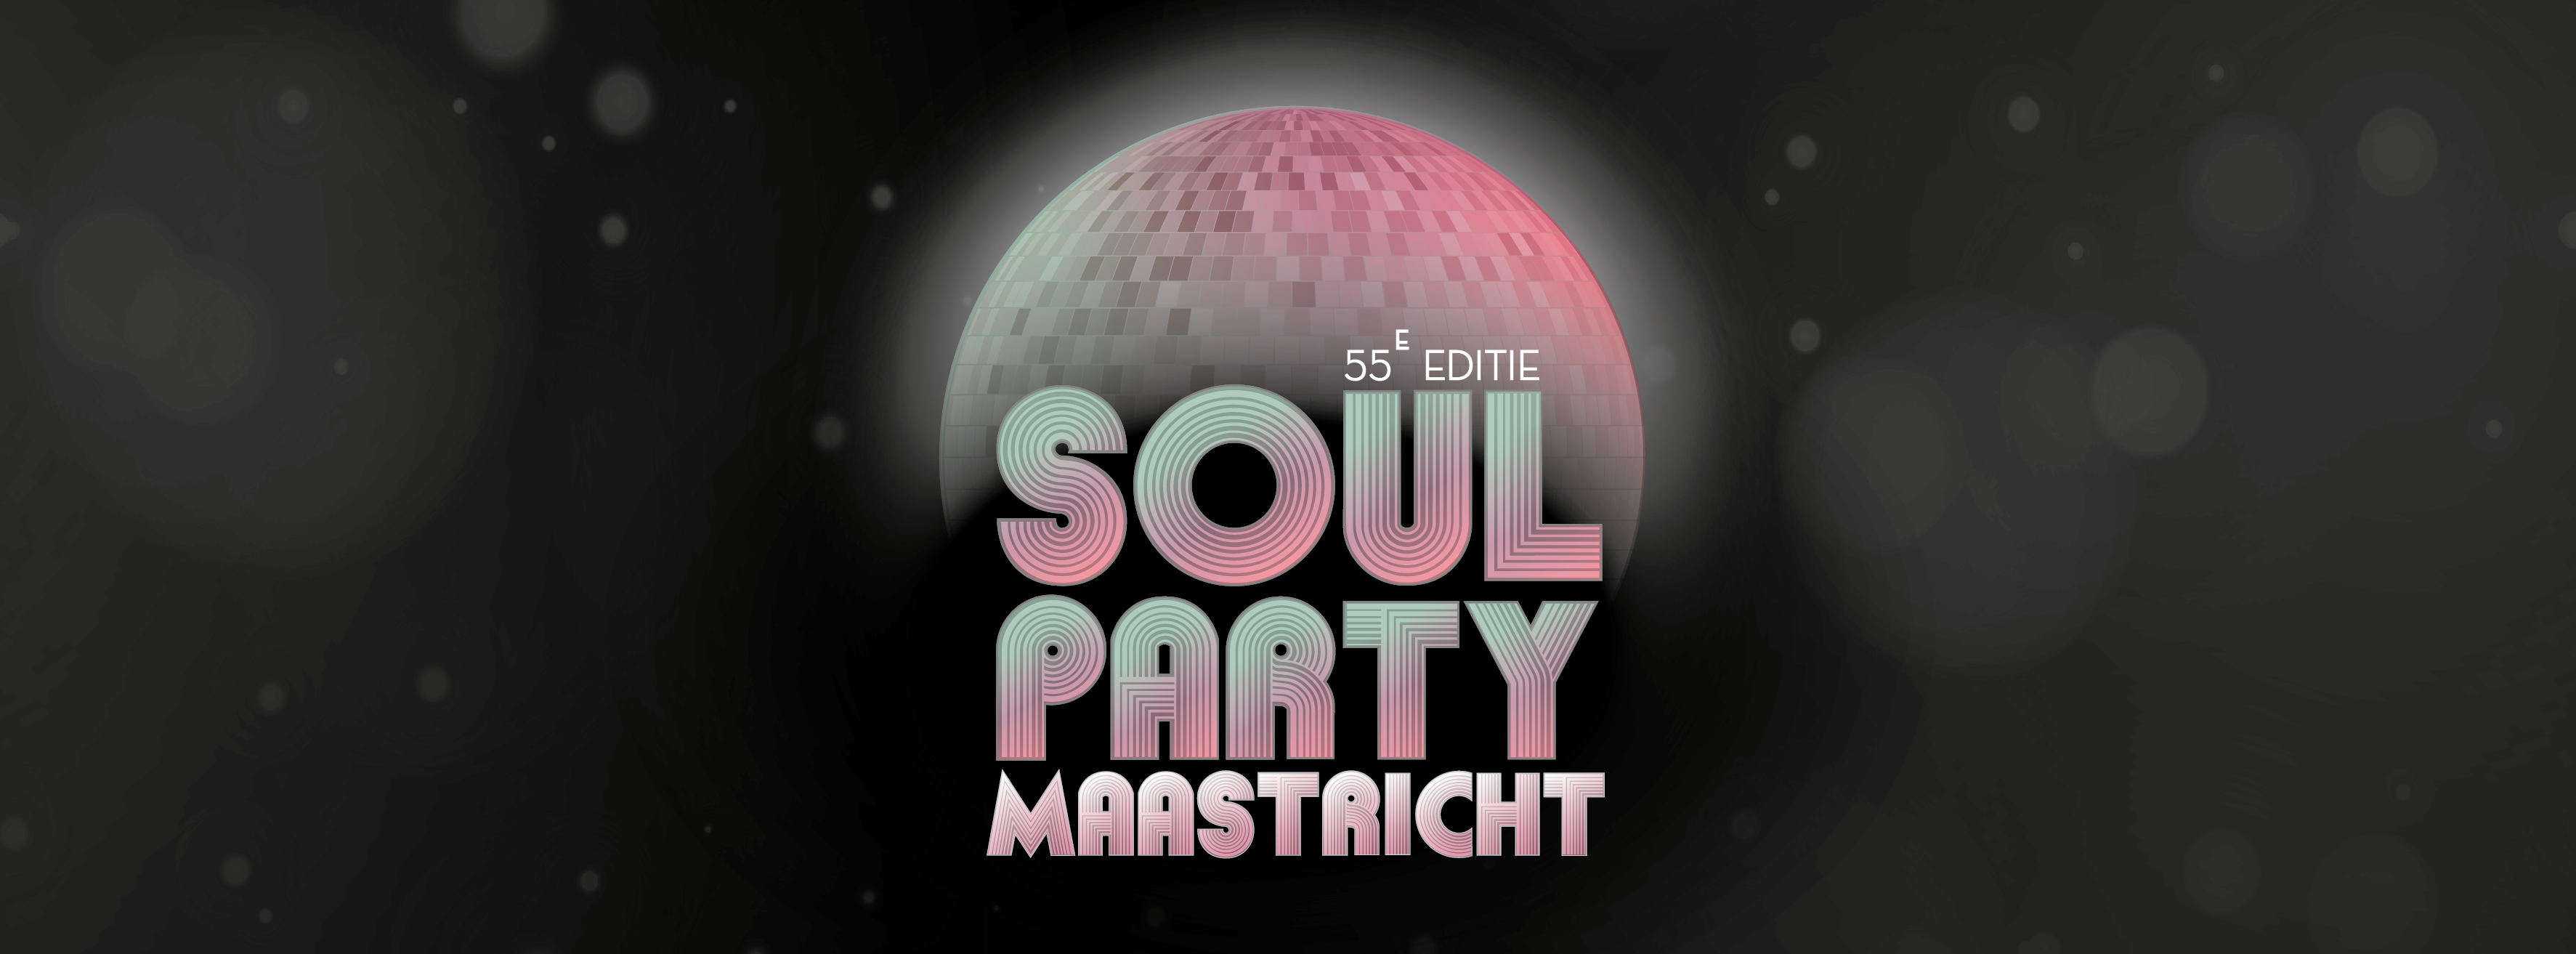 Soulparty 17 september 2016